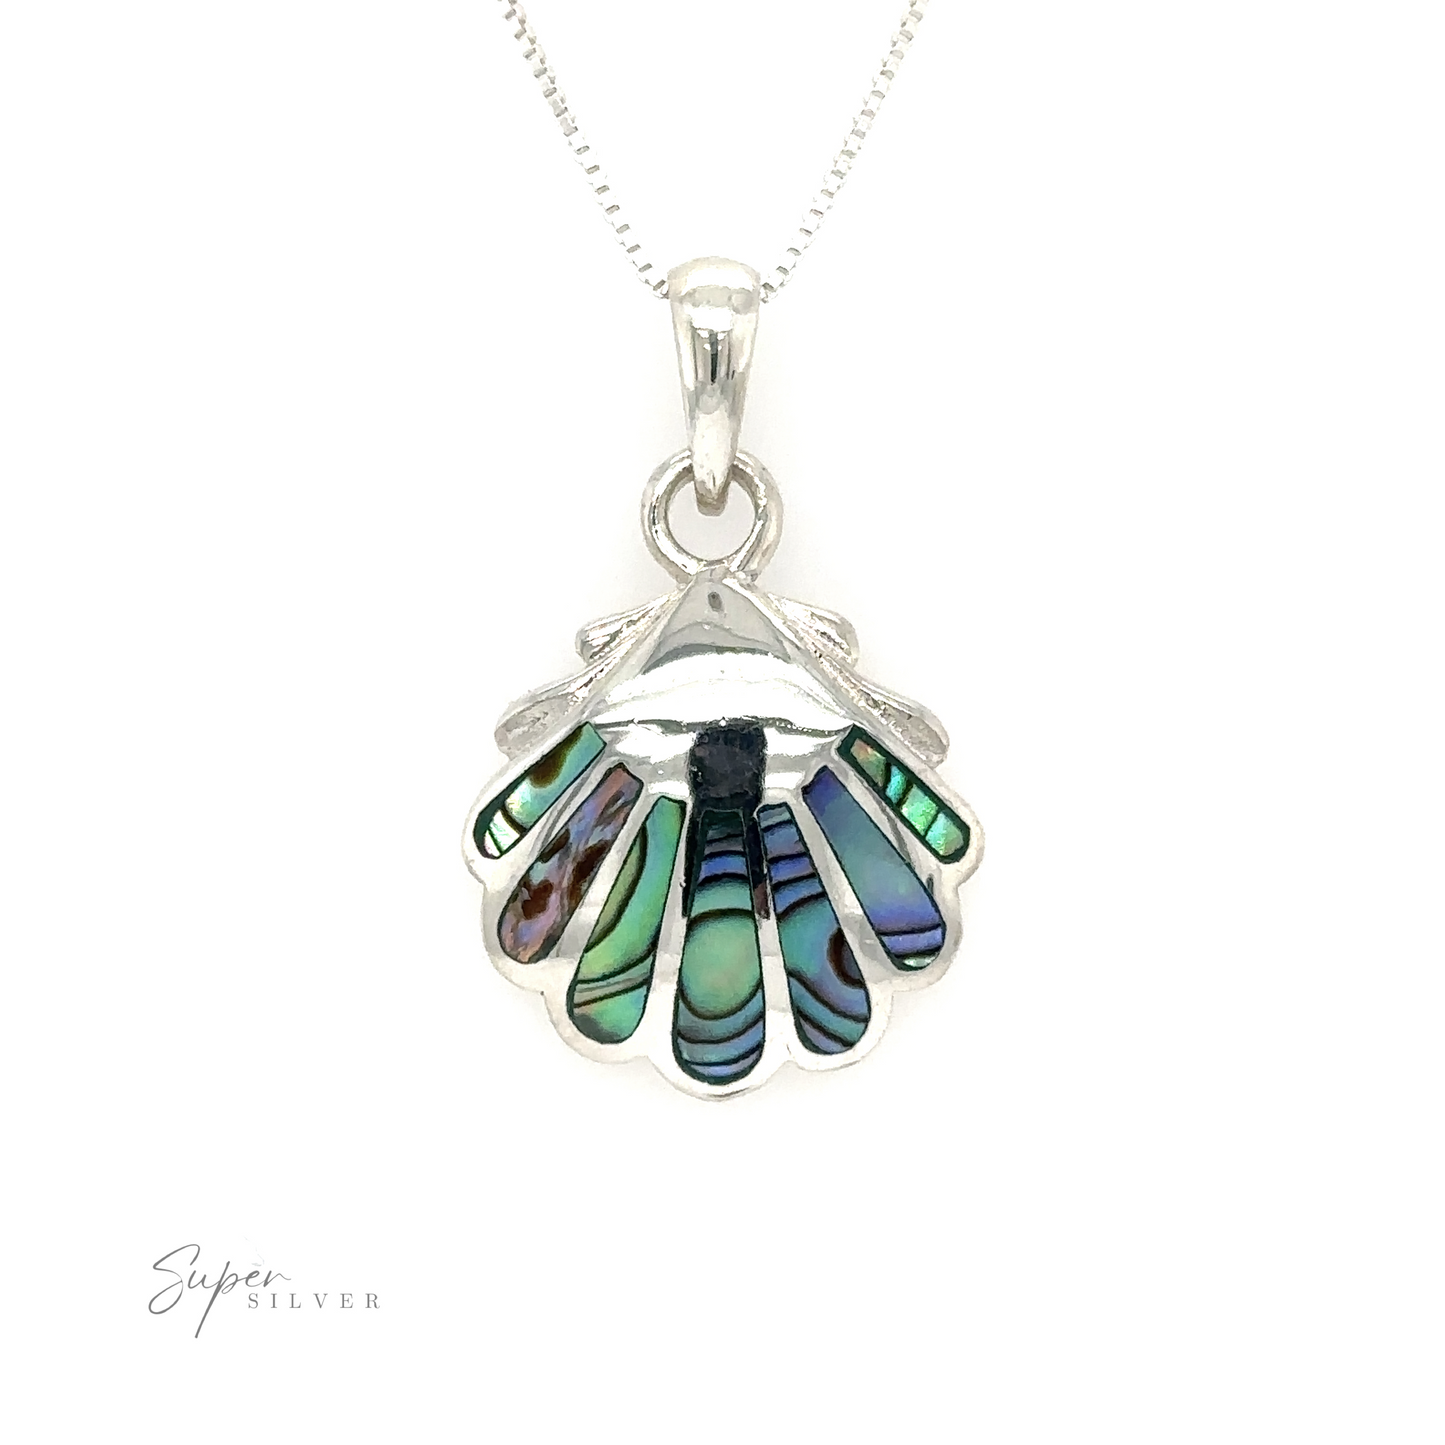 A clam shell pendant with an abalone shell on a silver chain.